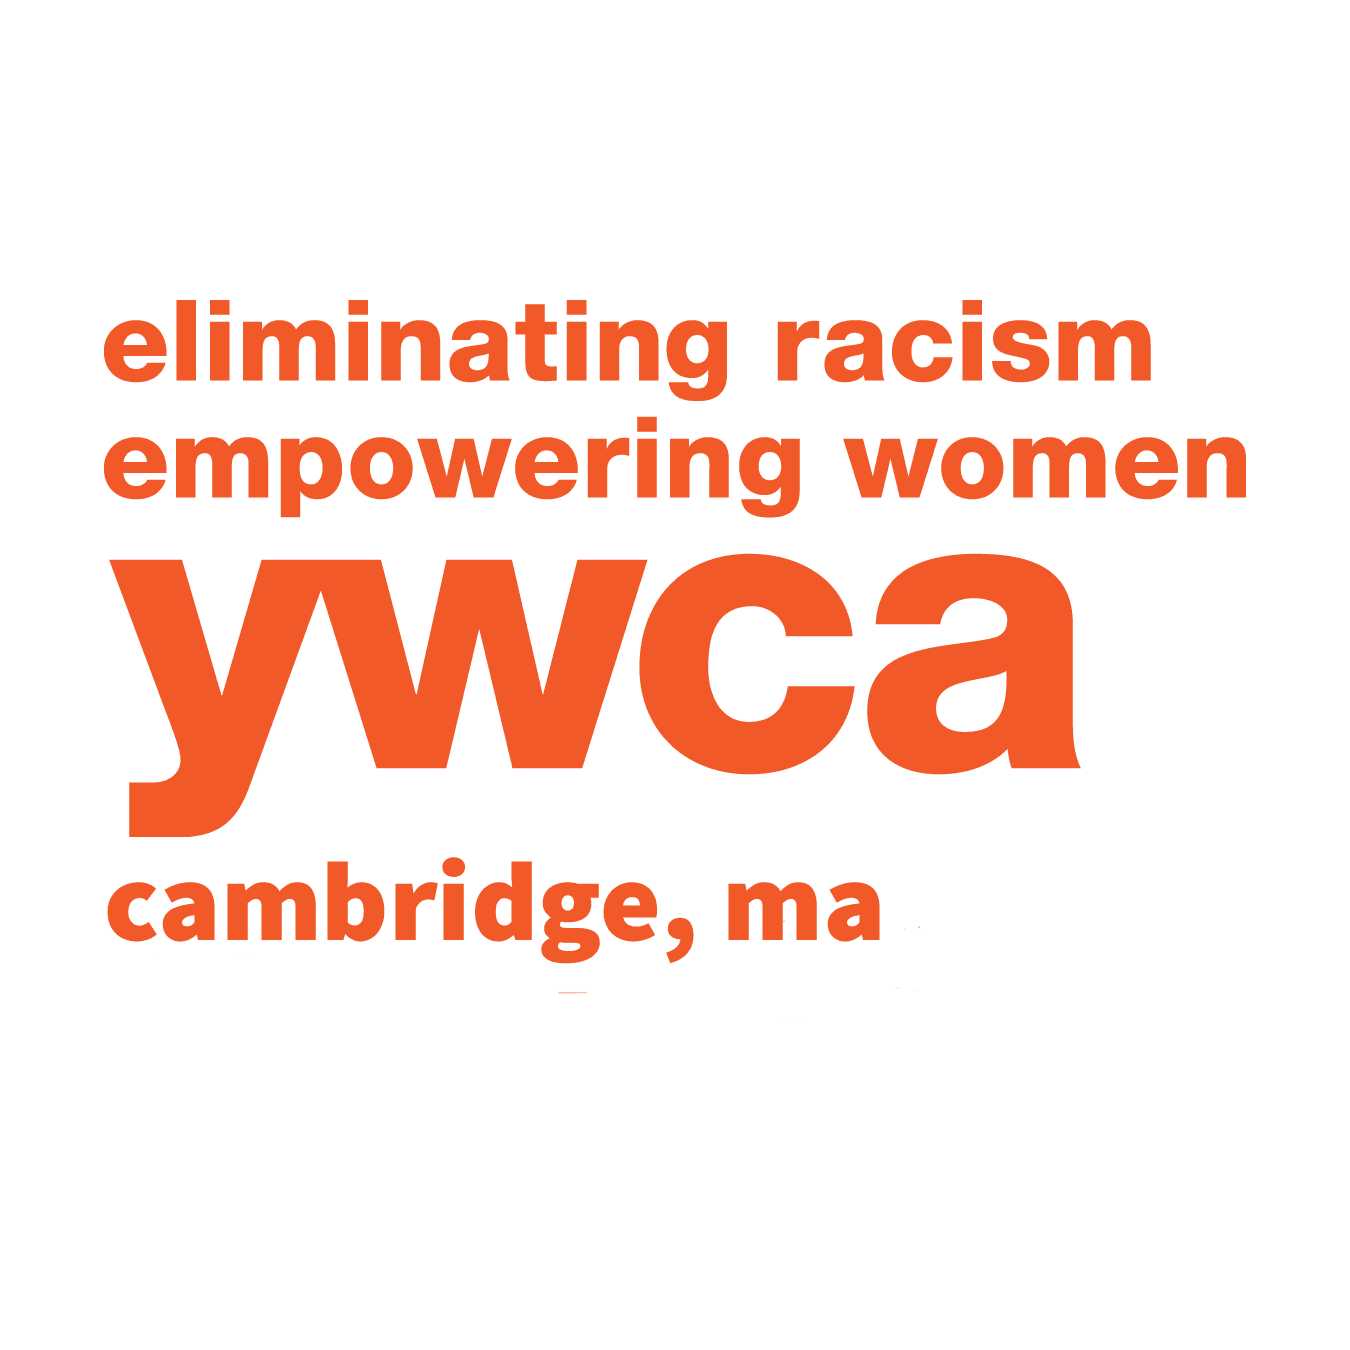 Cambridge YWCA Shelter for Women and Families